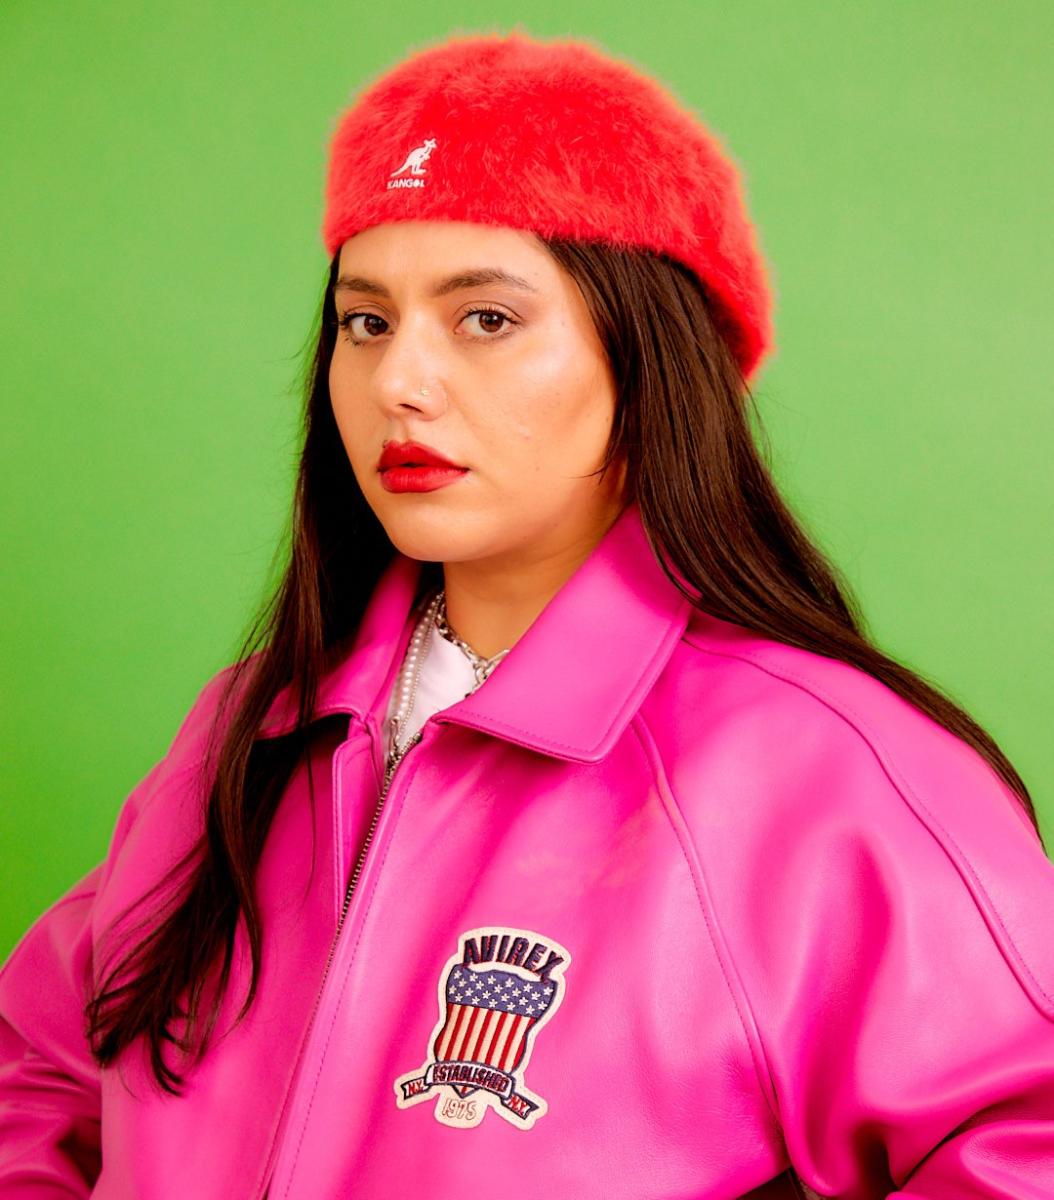 Image of Tara Kumar wearing a fluffy red hat and a pink bomber jacket against a green background